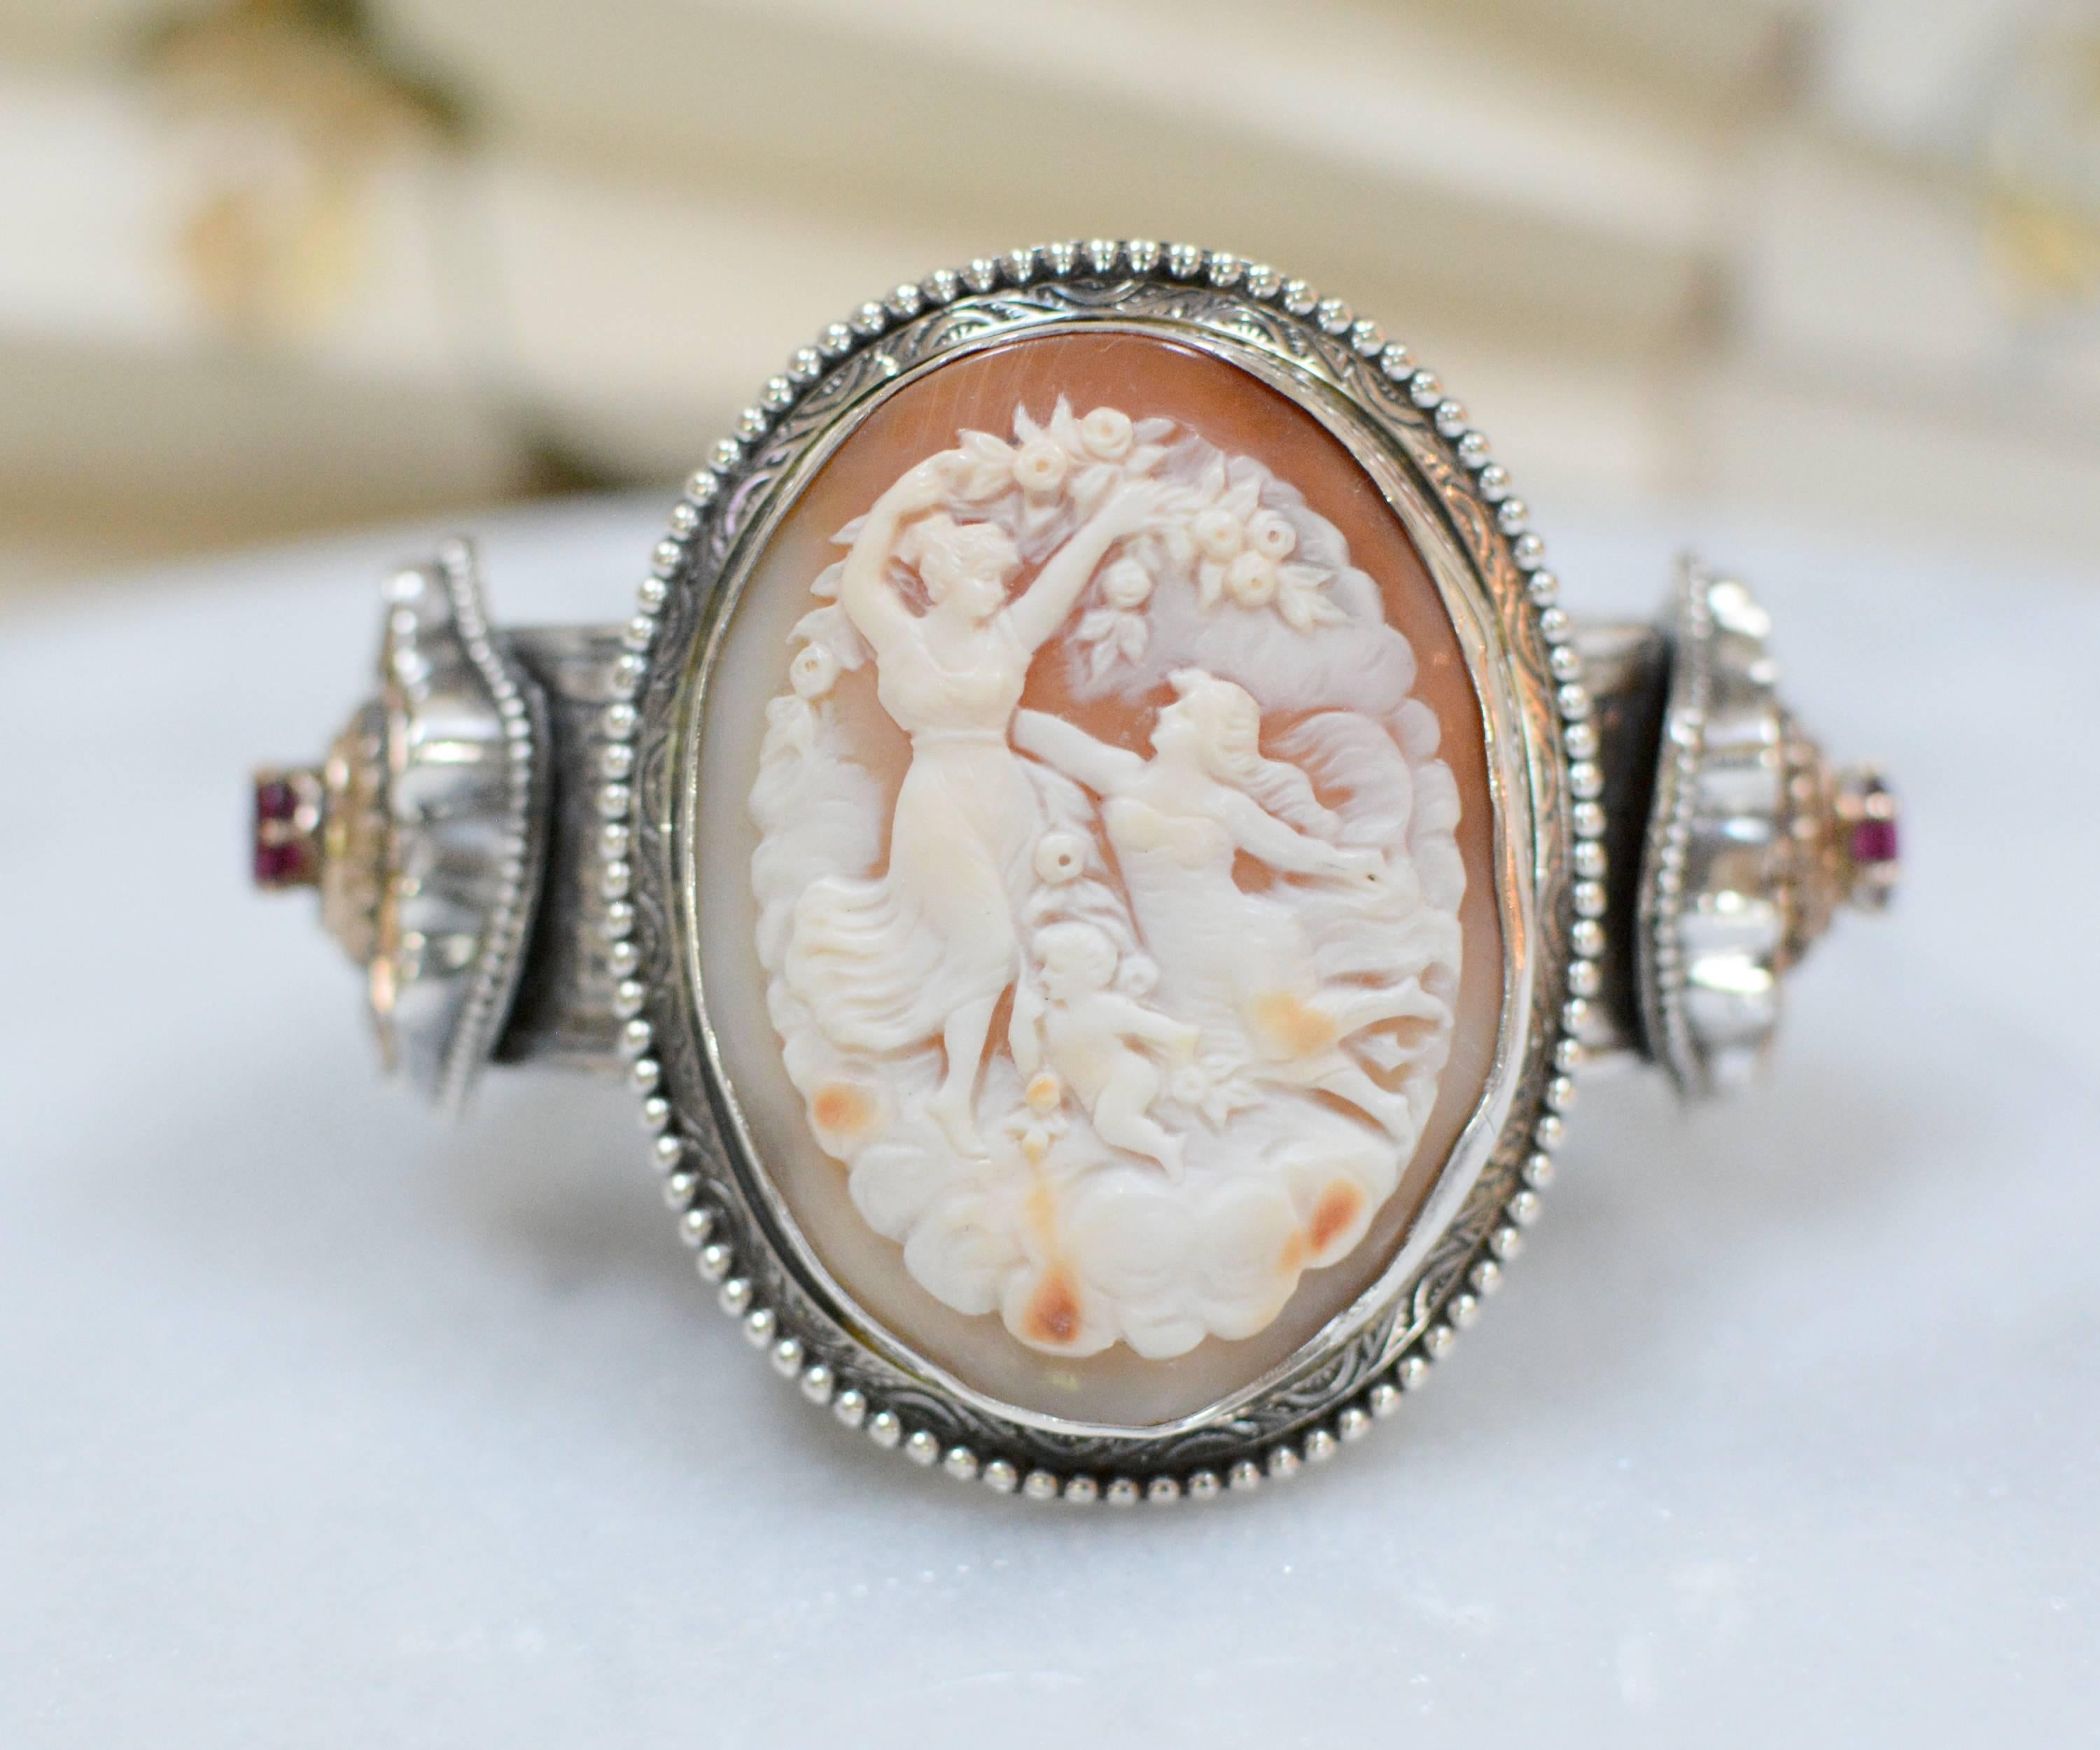 This one of a kind sterling silver cuff bracelet features a museum quality nineteenth century  period cameo depicting two Goddesses with a cherub angel. On either side of this exquisite museum quality cameo are a pair of Victorian period gold